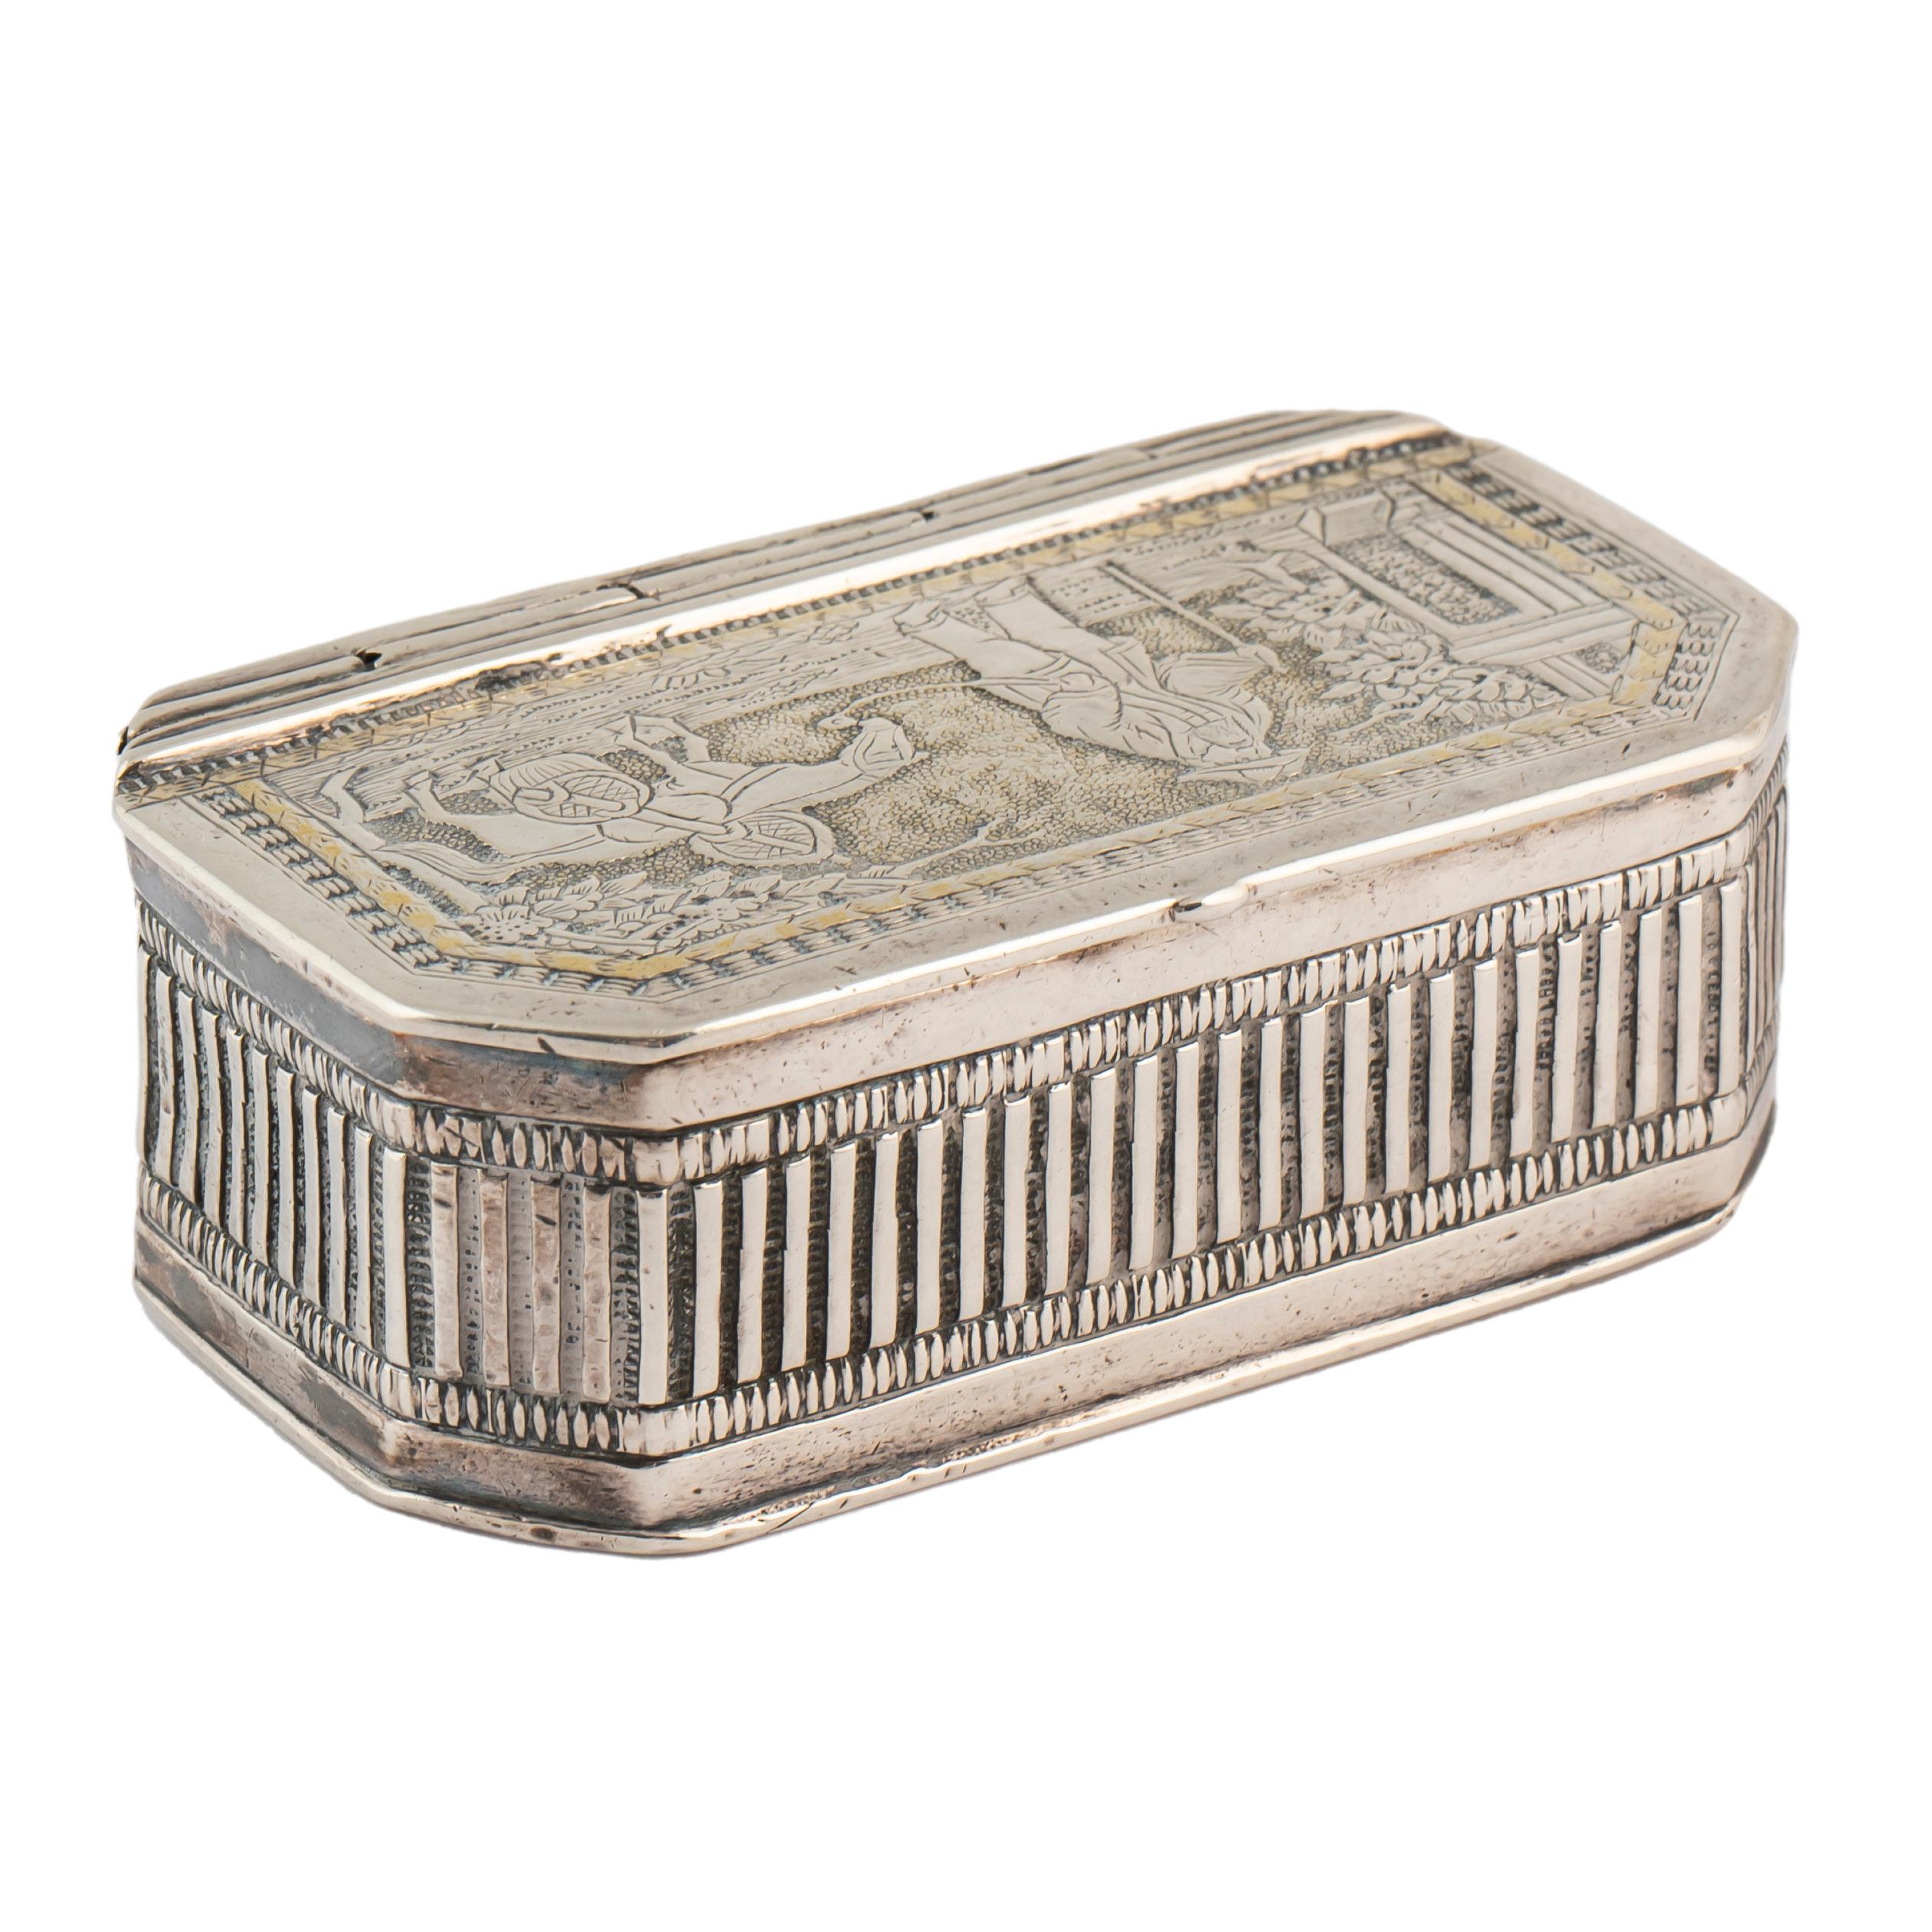 A heavy silver box with canted corners, the hinged cover in the style of an ancient traditional woodcut featuring a Chinese traveling figure or salesman wearing a hat a walking stick in one hand, the other leading his horse from a rope burdened with